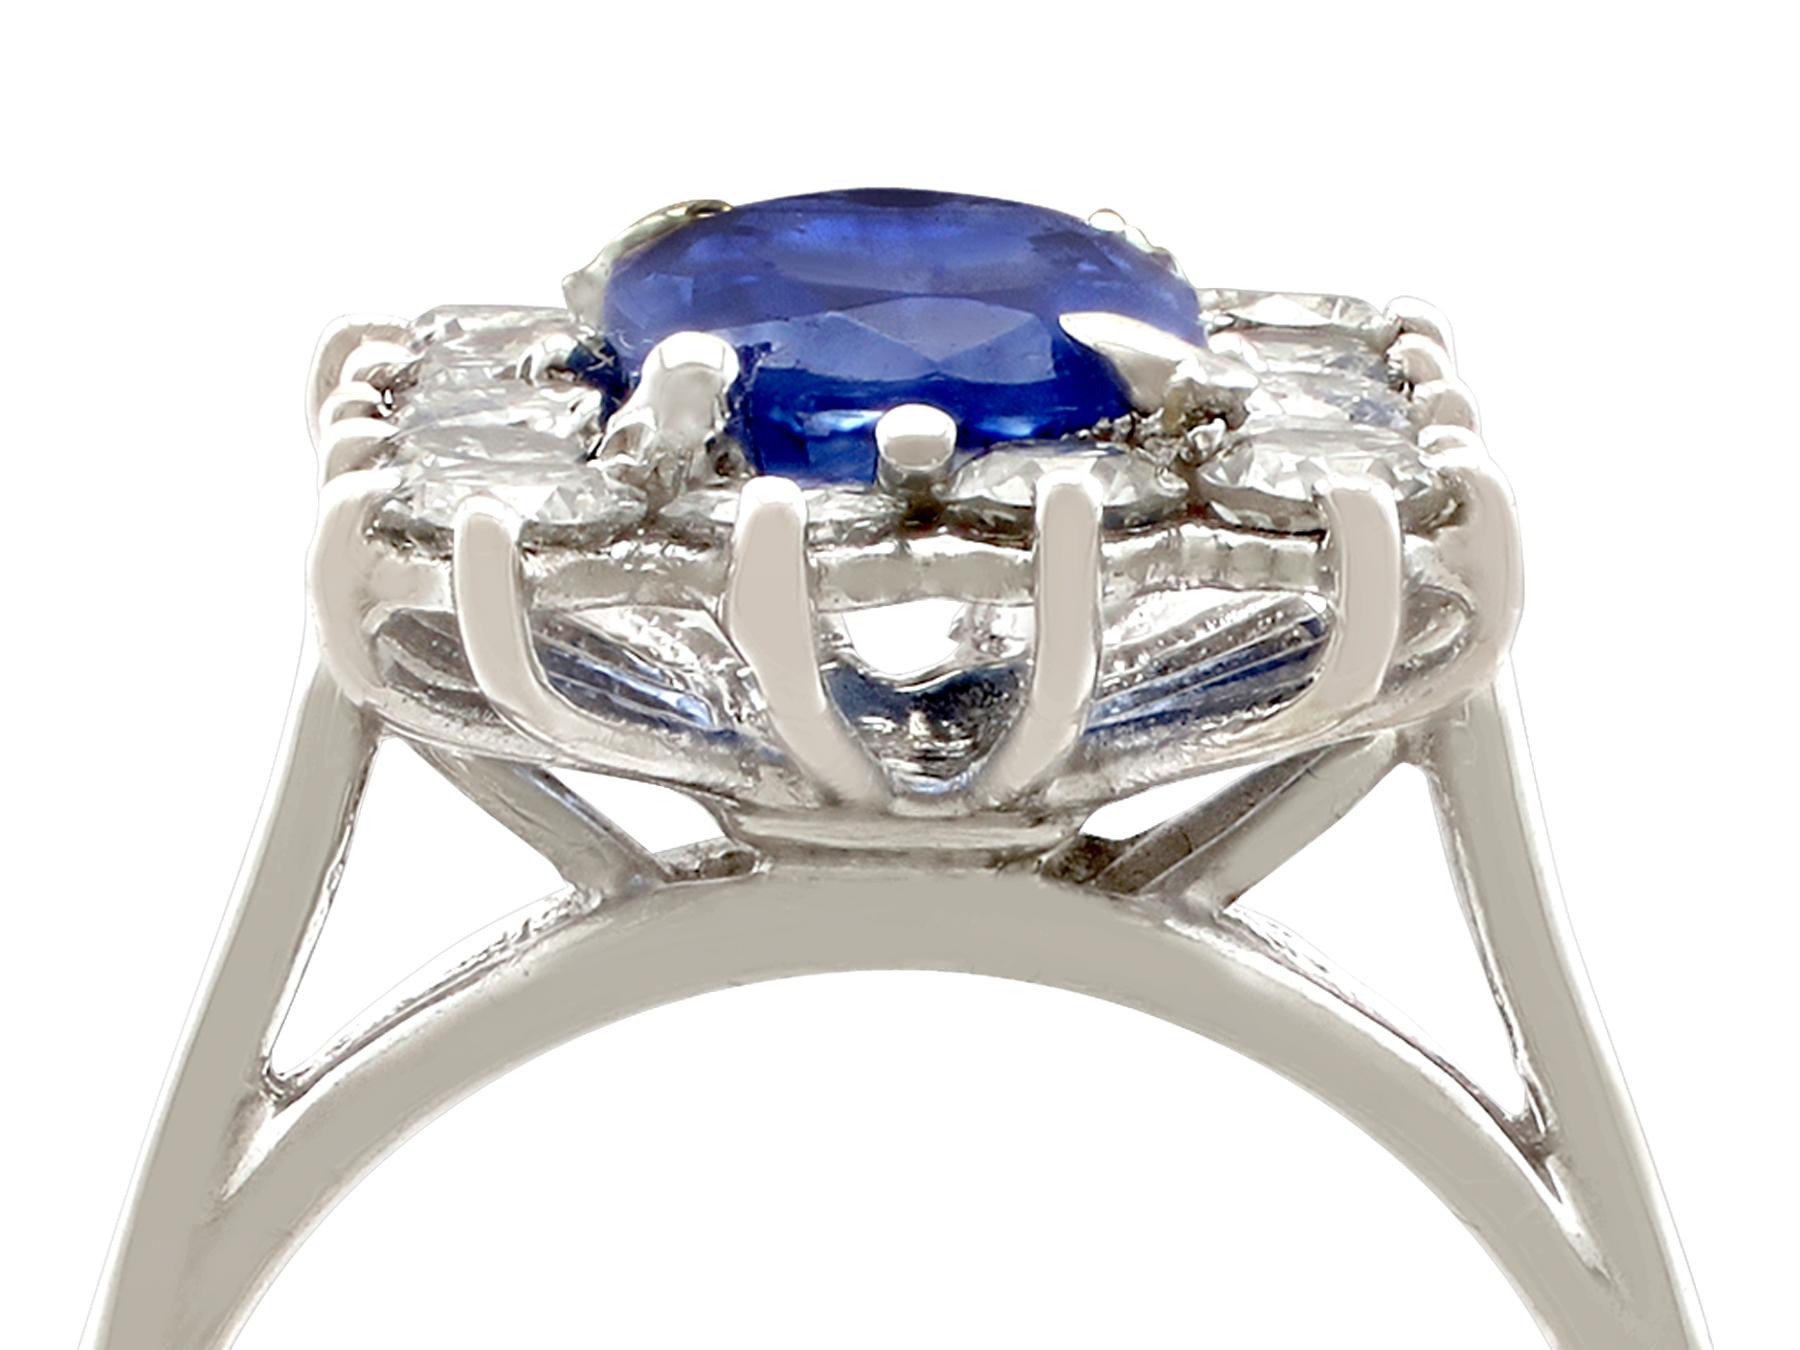 A fine and impressive vintage 2.18 carat natural blue sapphire and 1.43 carat diamond, 18k white gold dress ring; part of our vintage jewelry and estate jewelry collections

This impressive sapphire and diamond cluster ring has been crafted in 18k